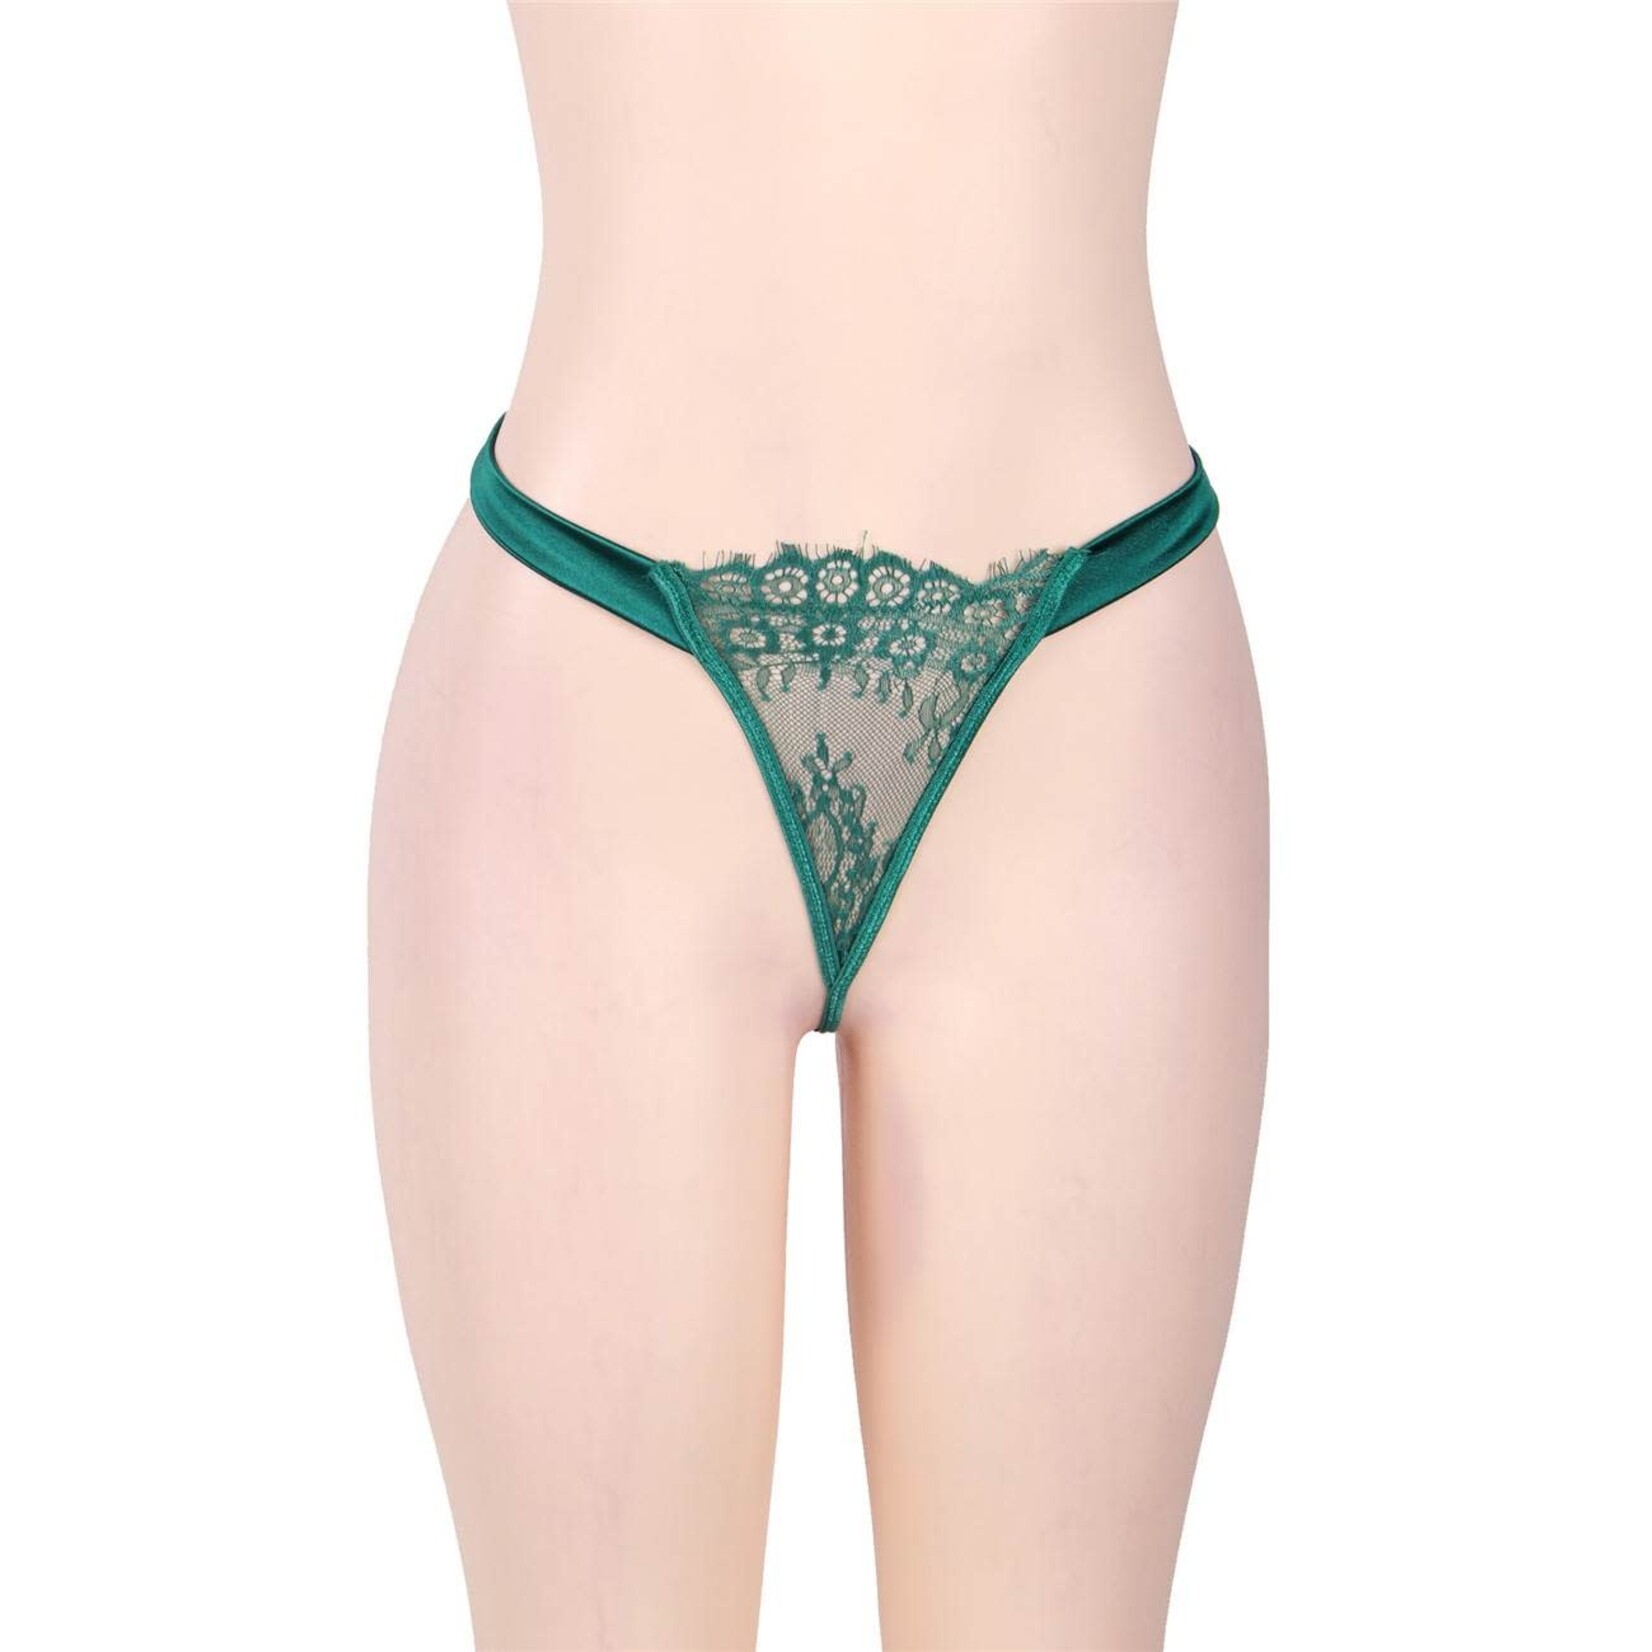 OH YEAH! -  ELEGANT EYELASH LACE GARTER GREEN LINGERIE WITH UNDERWIRE XS-S